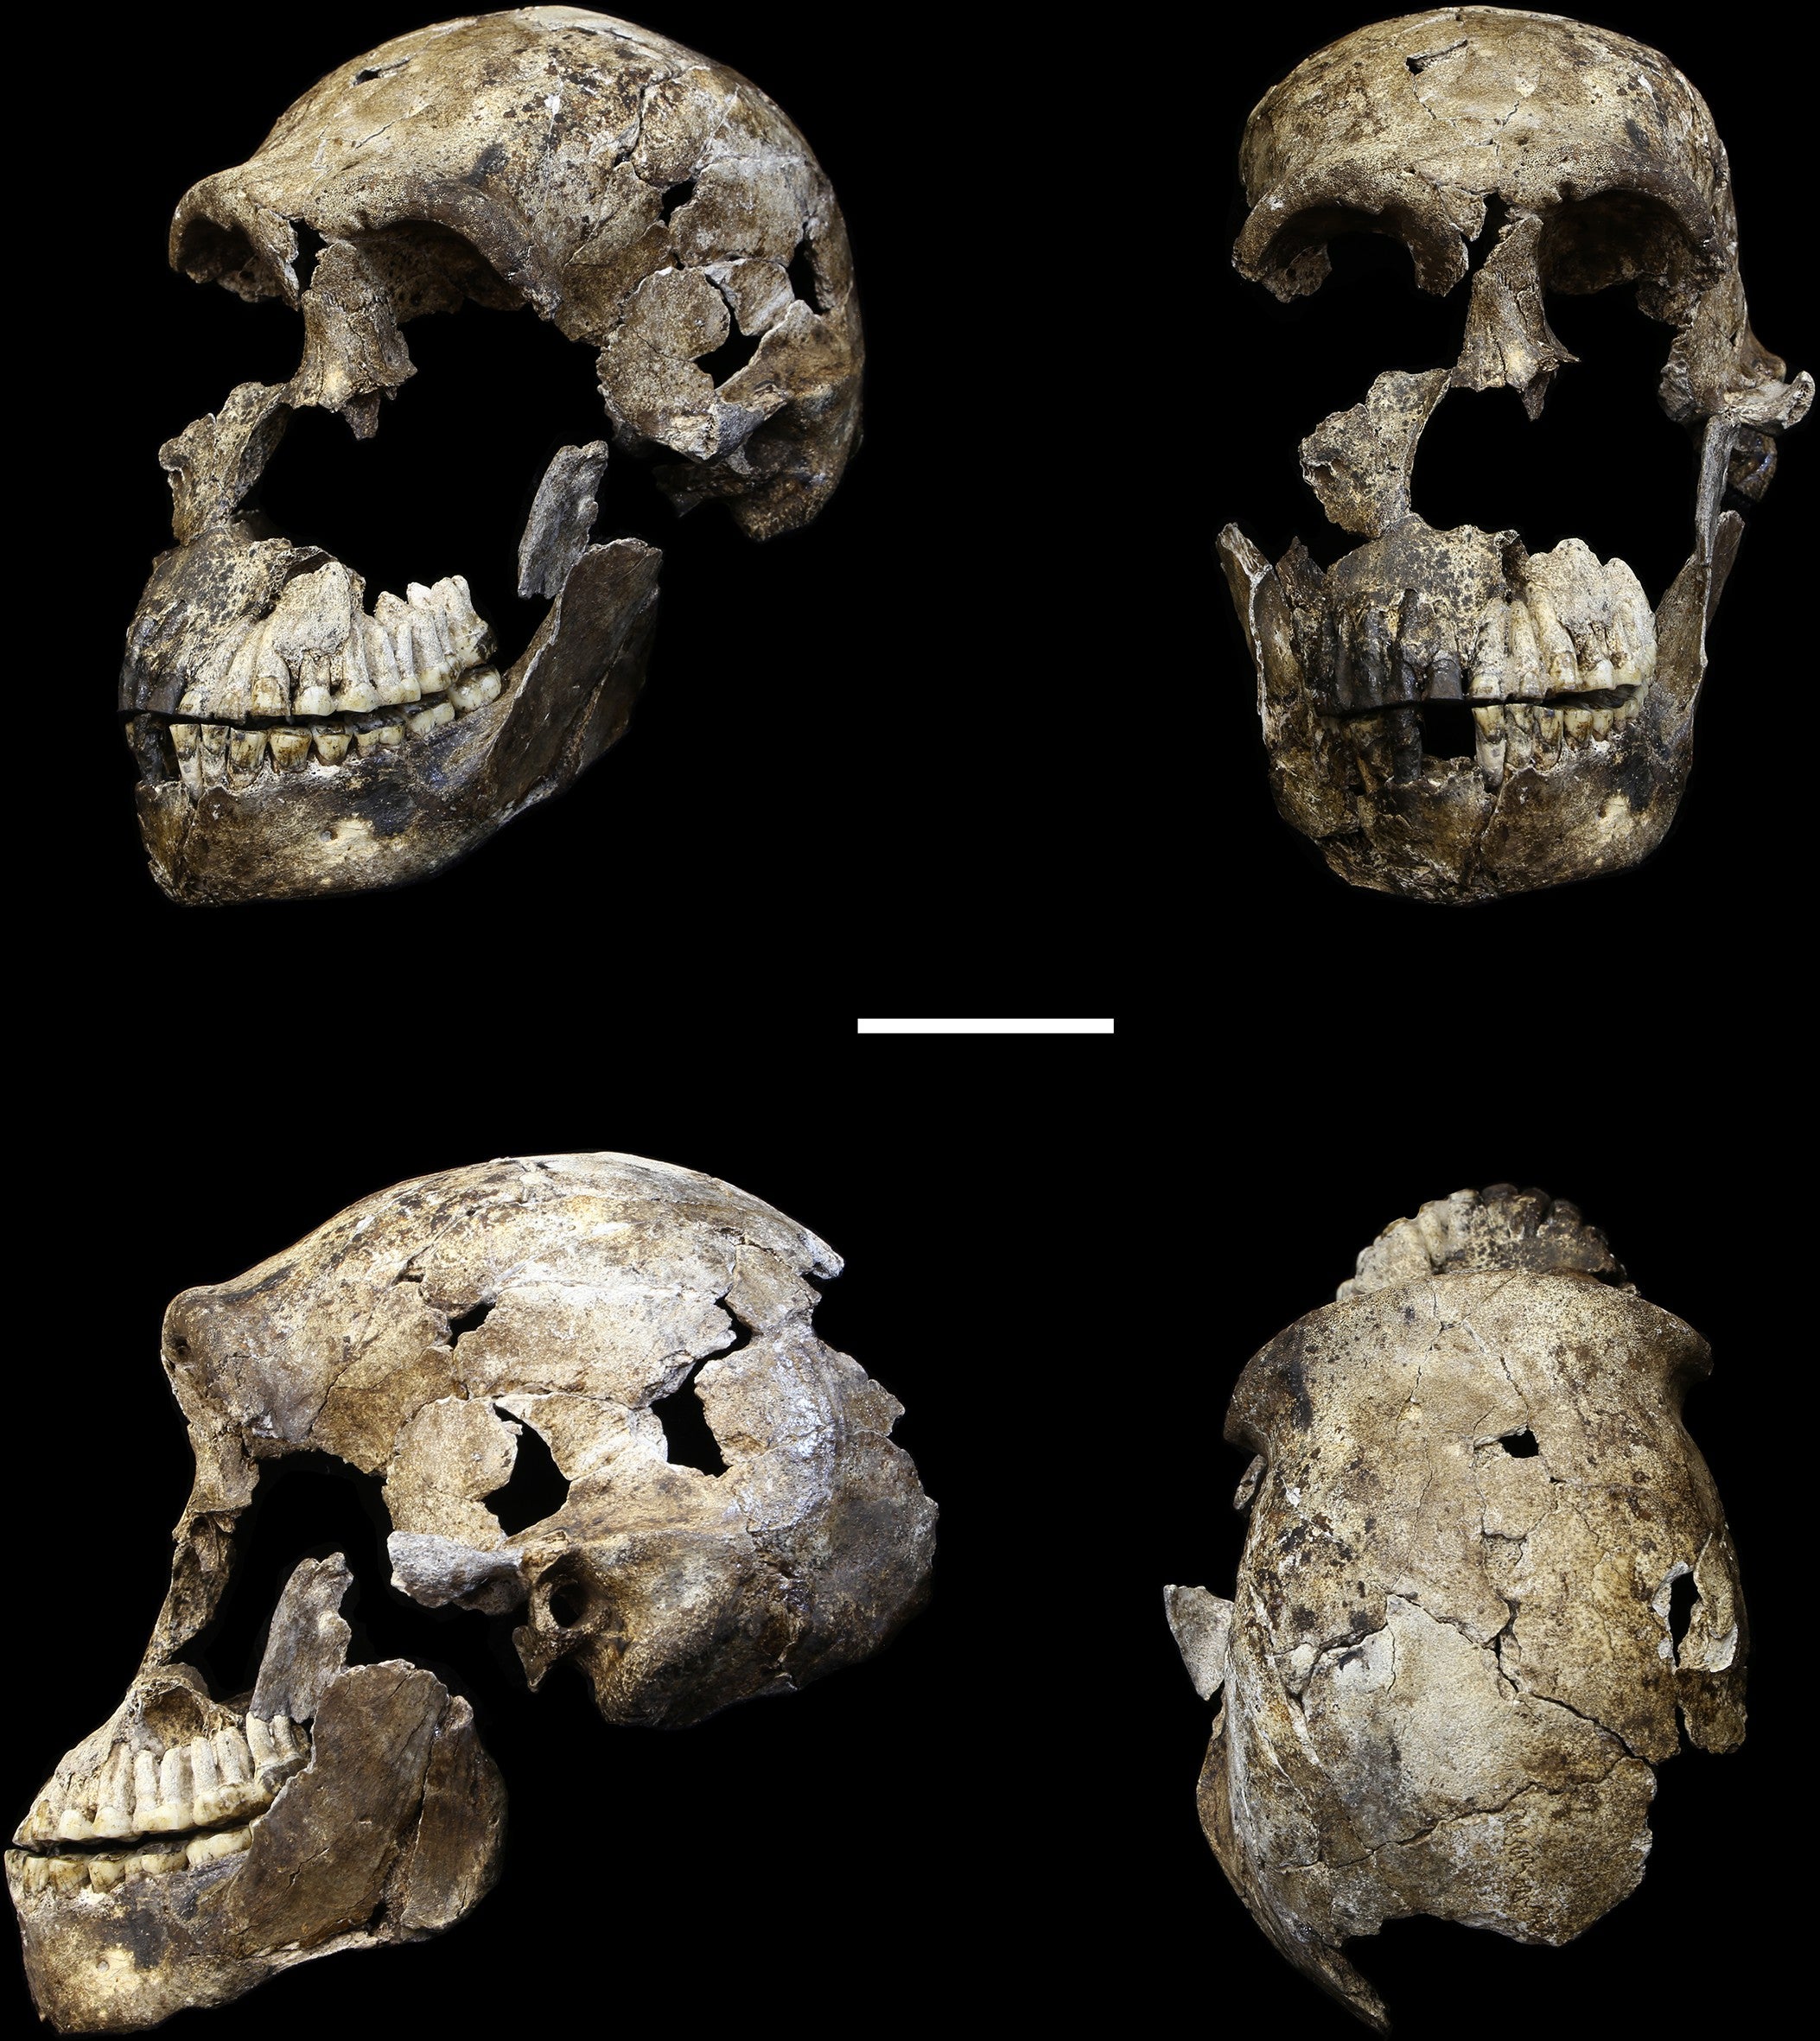 The species has been named Homo naledi by the scientists